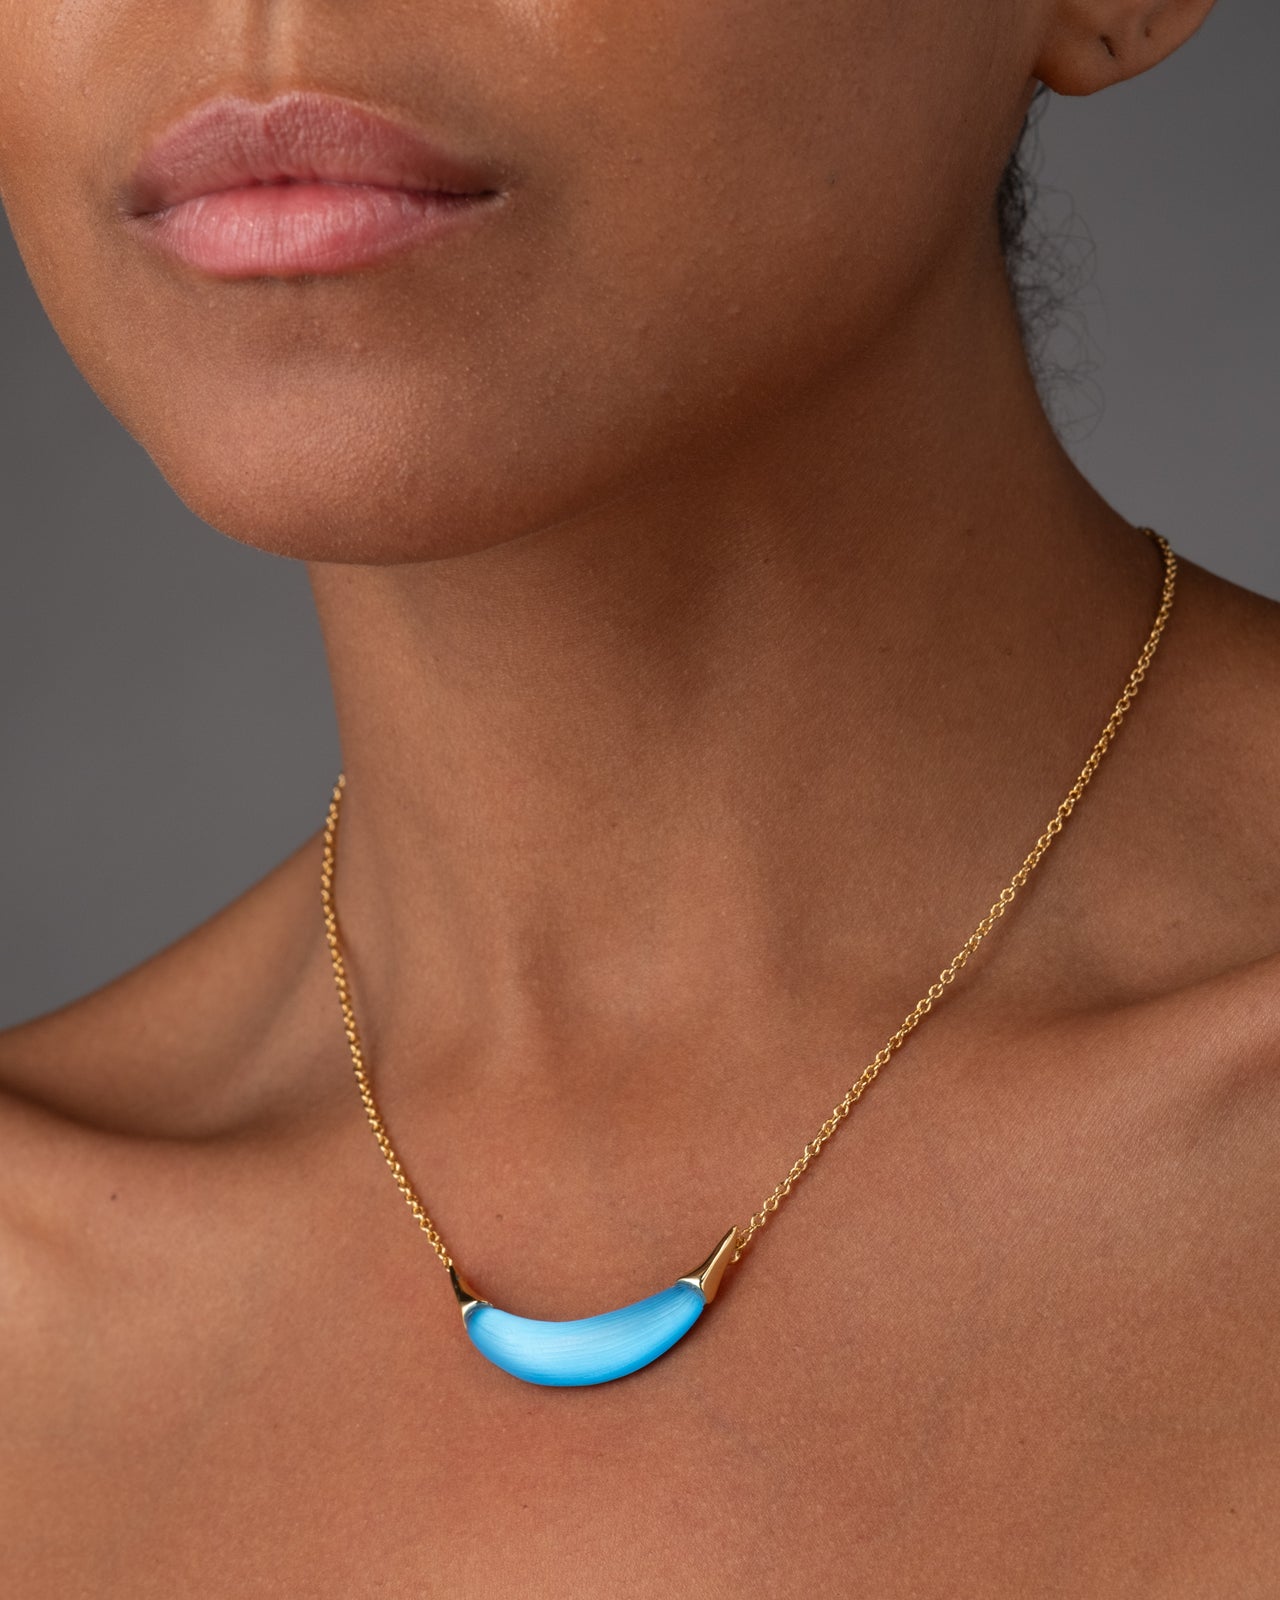 Gold Capped Crescent Lucite Necklace- Neon Blue - Photo 2